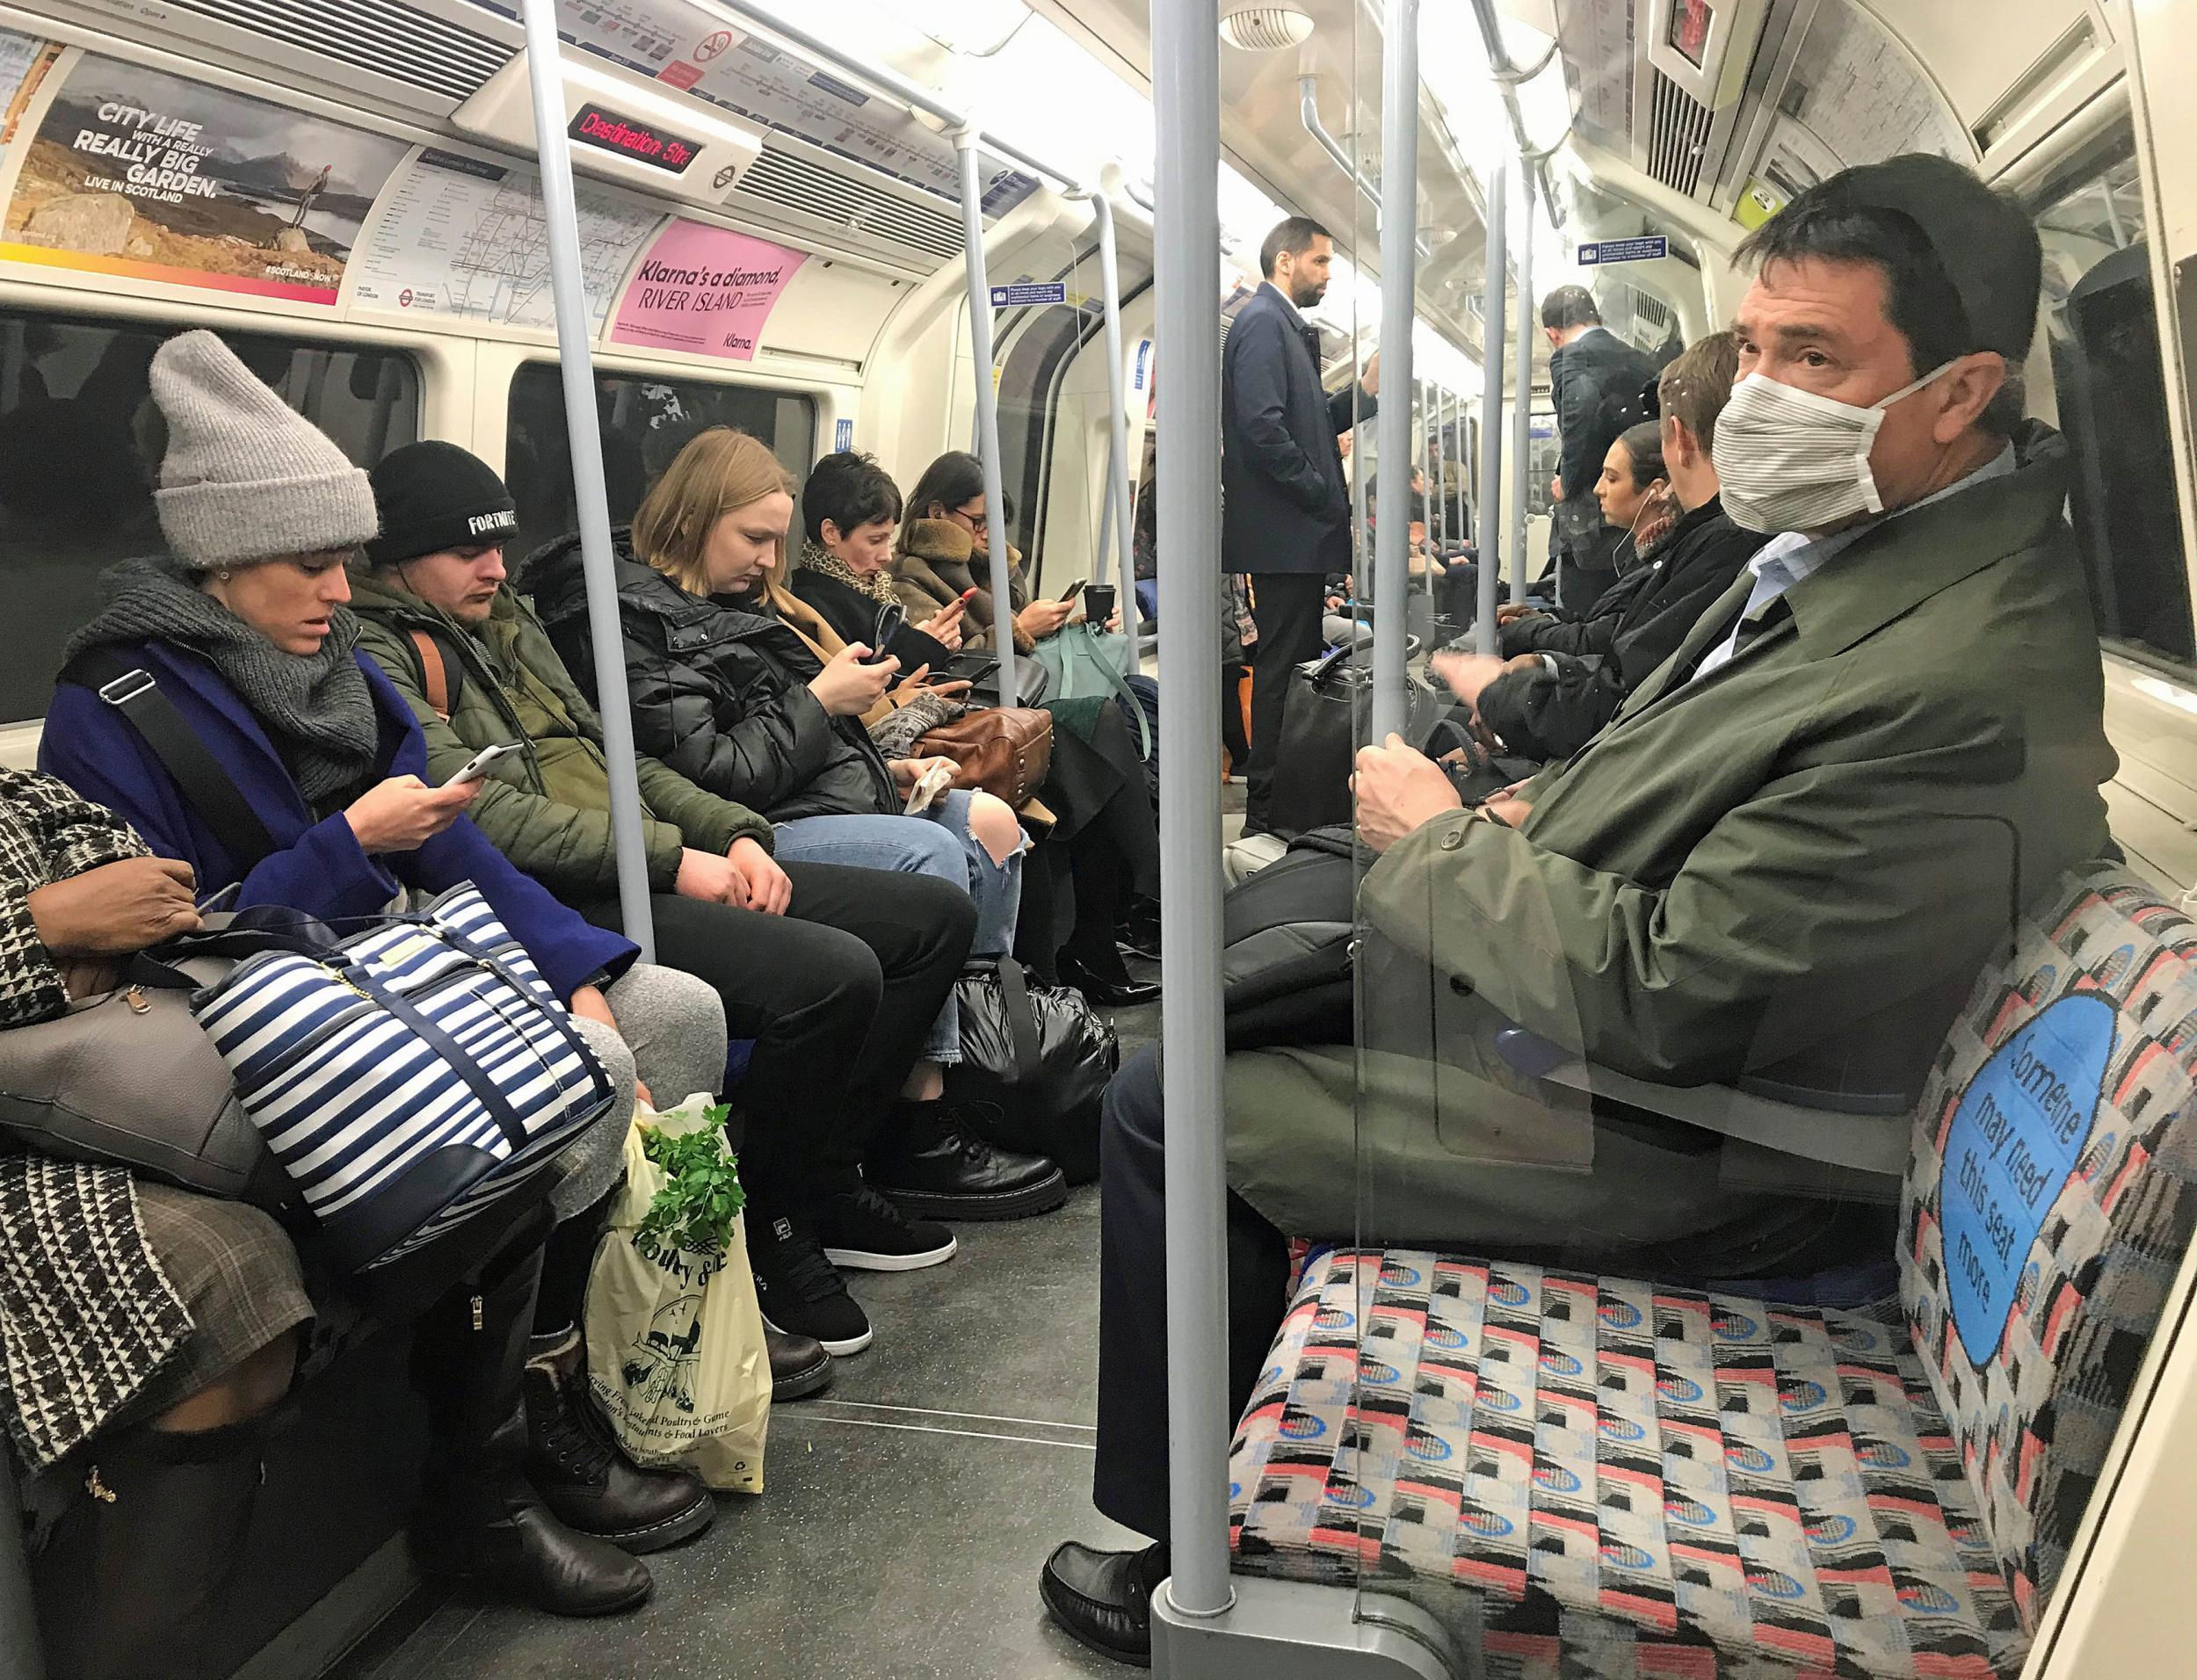 A man on the Jubilee line of the London Underground tube network wearing a protective facemask